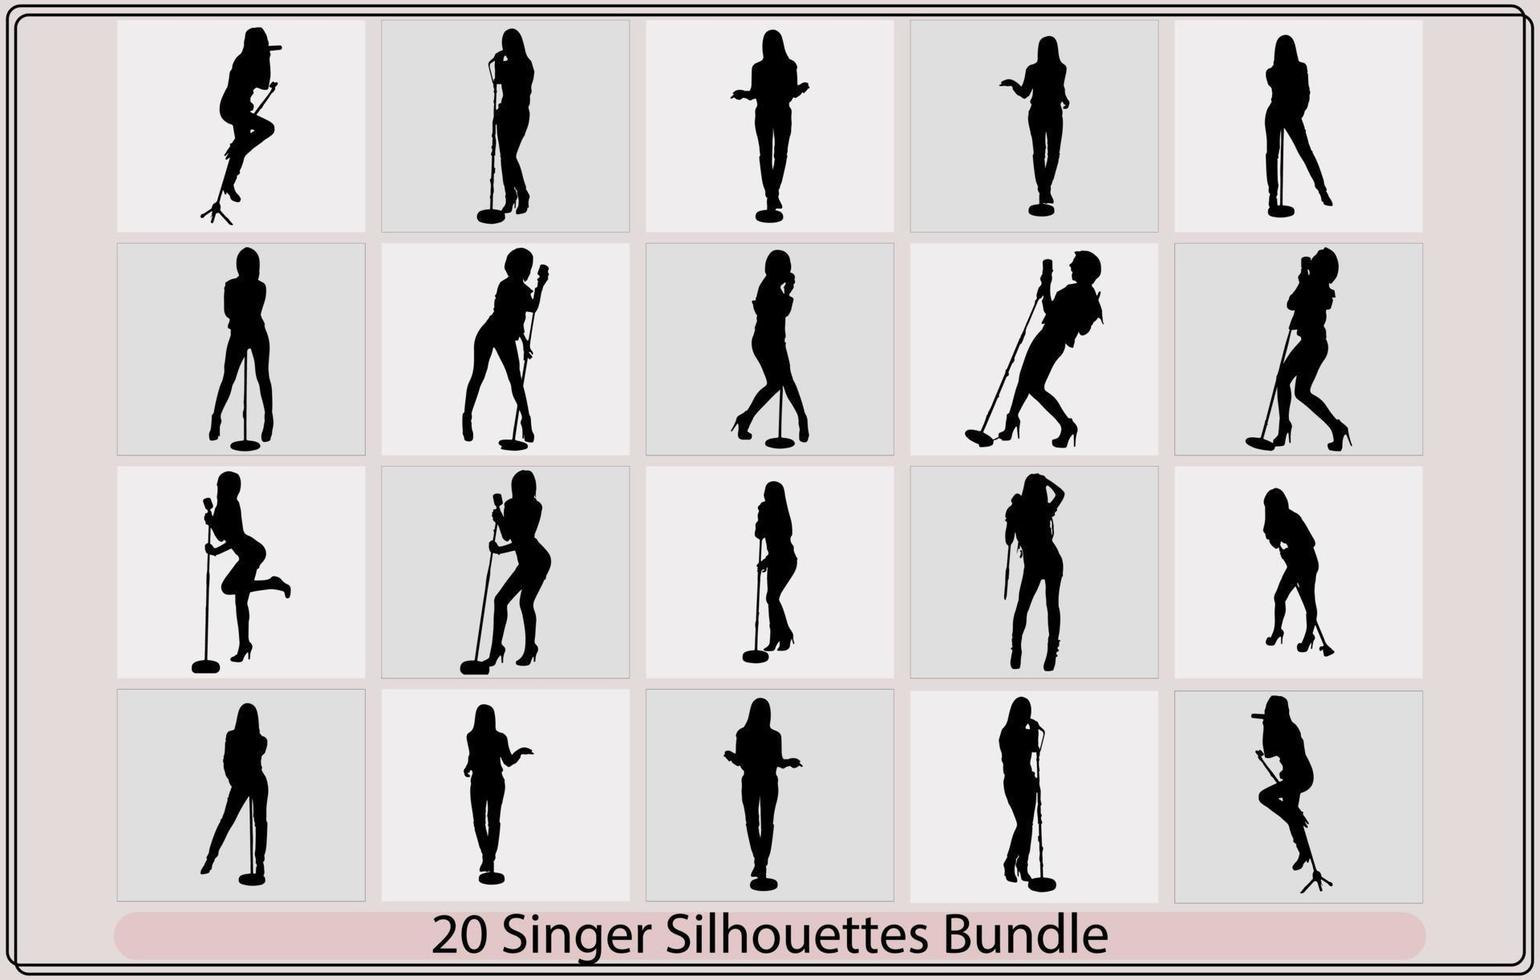 men and women Singer silhouettes in different poses,Singer collection,singing in silhouette,Male singer vector illustration